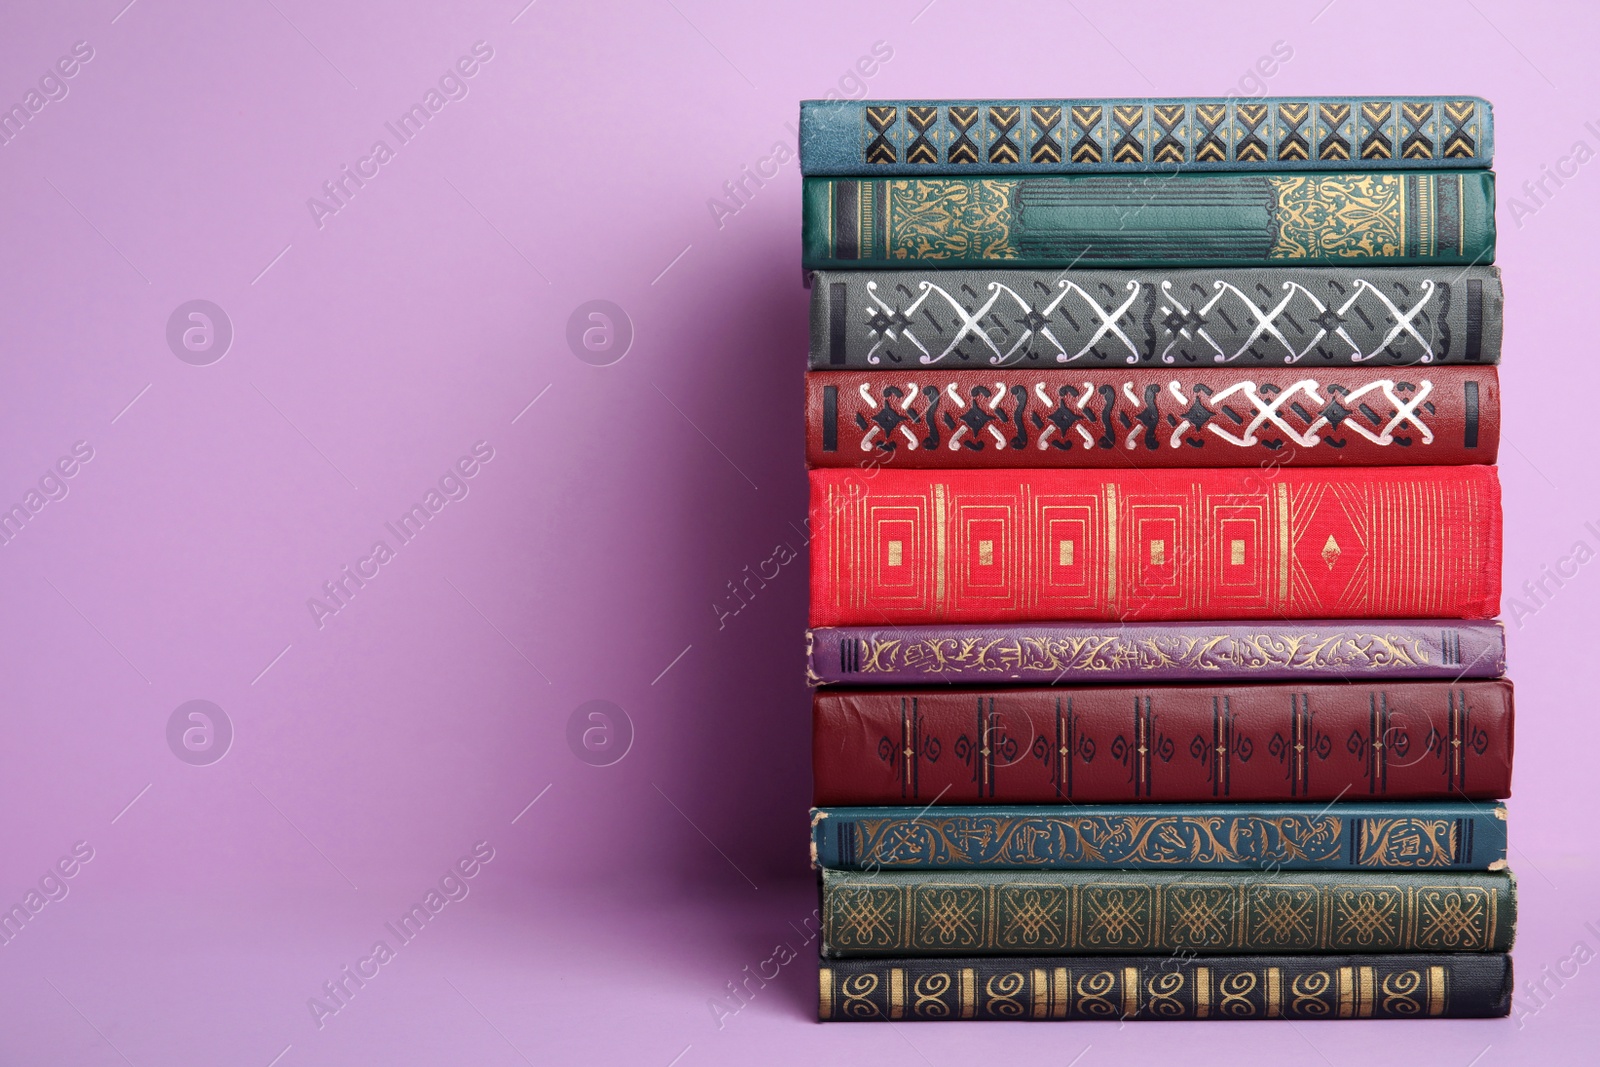 Photo of Stack of hardcover books on violet background. Space for text